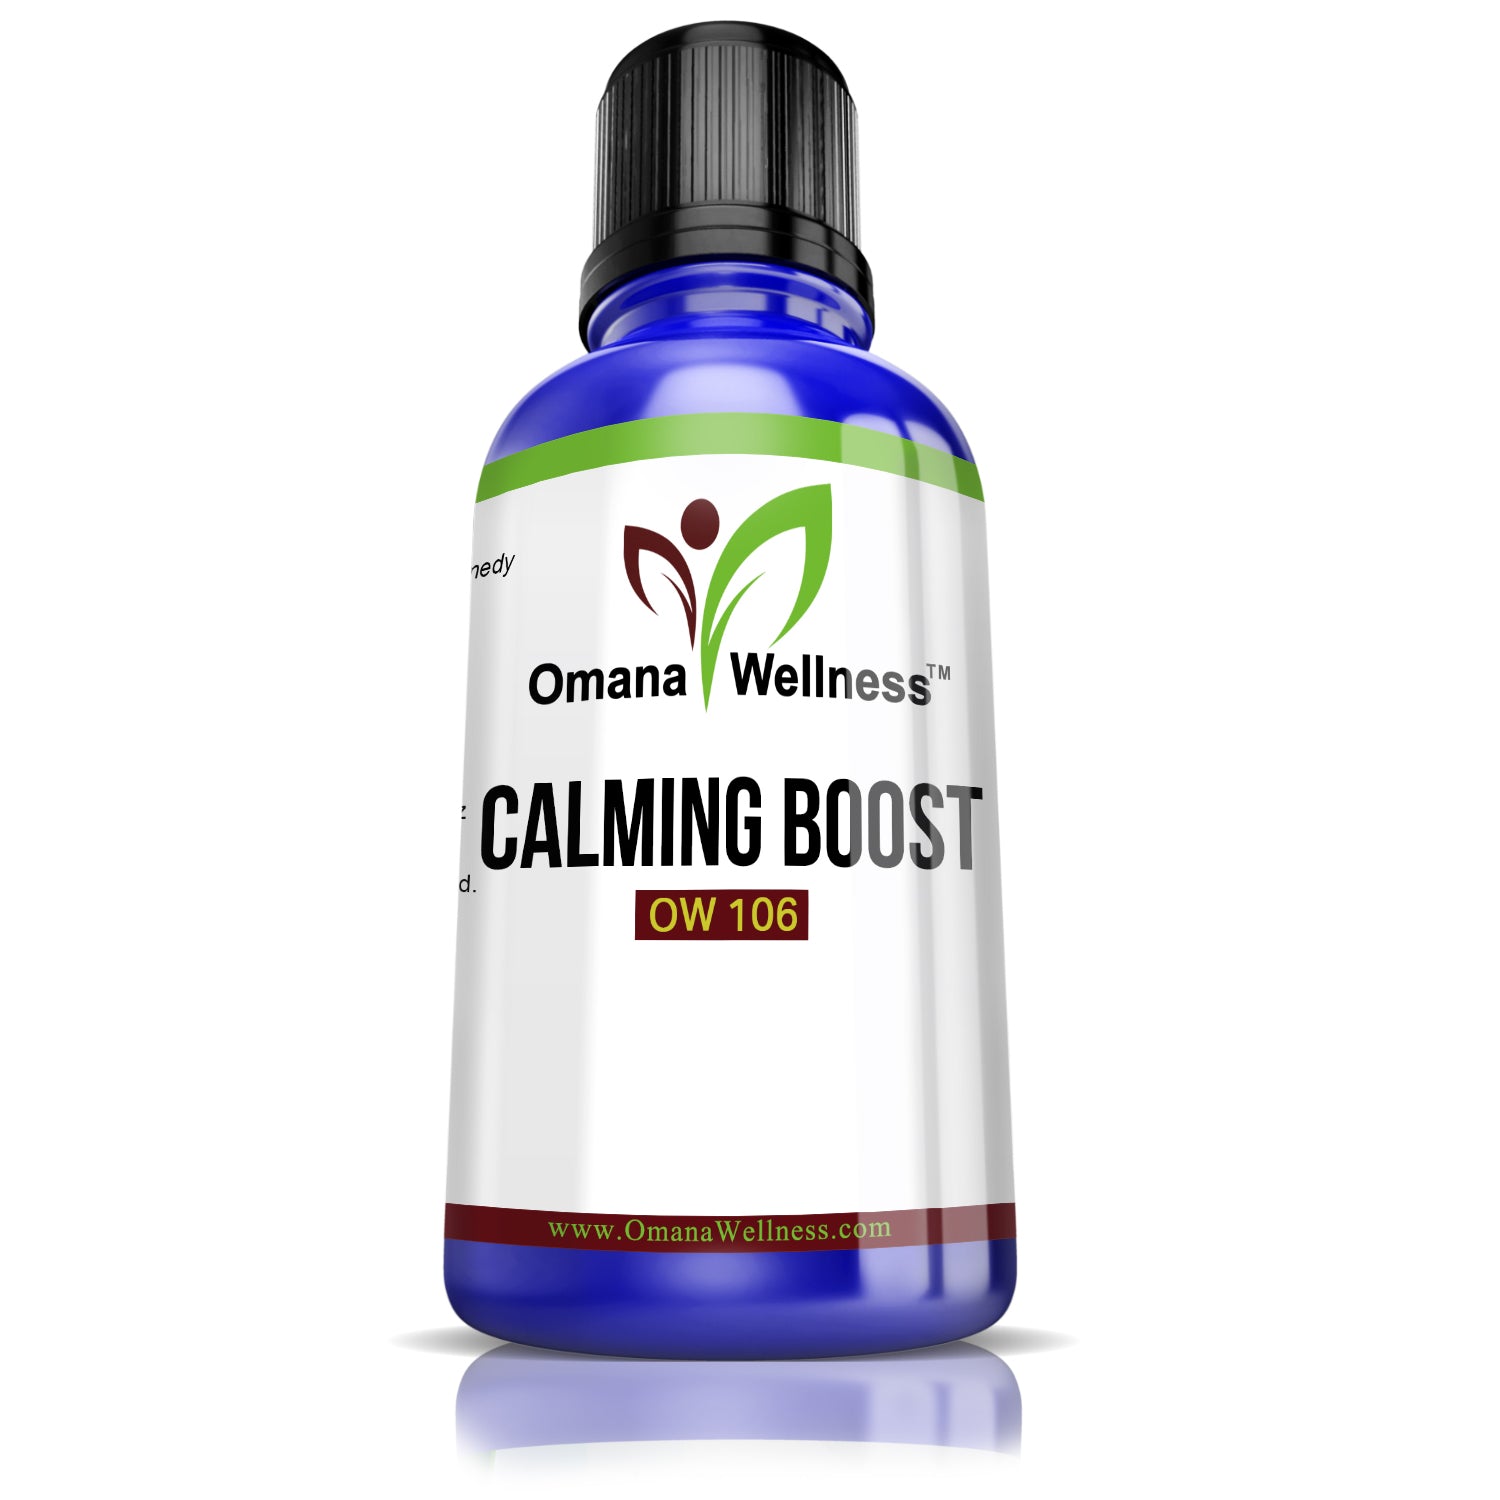 CALMING BOOST OW106